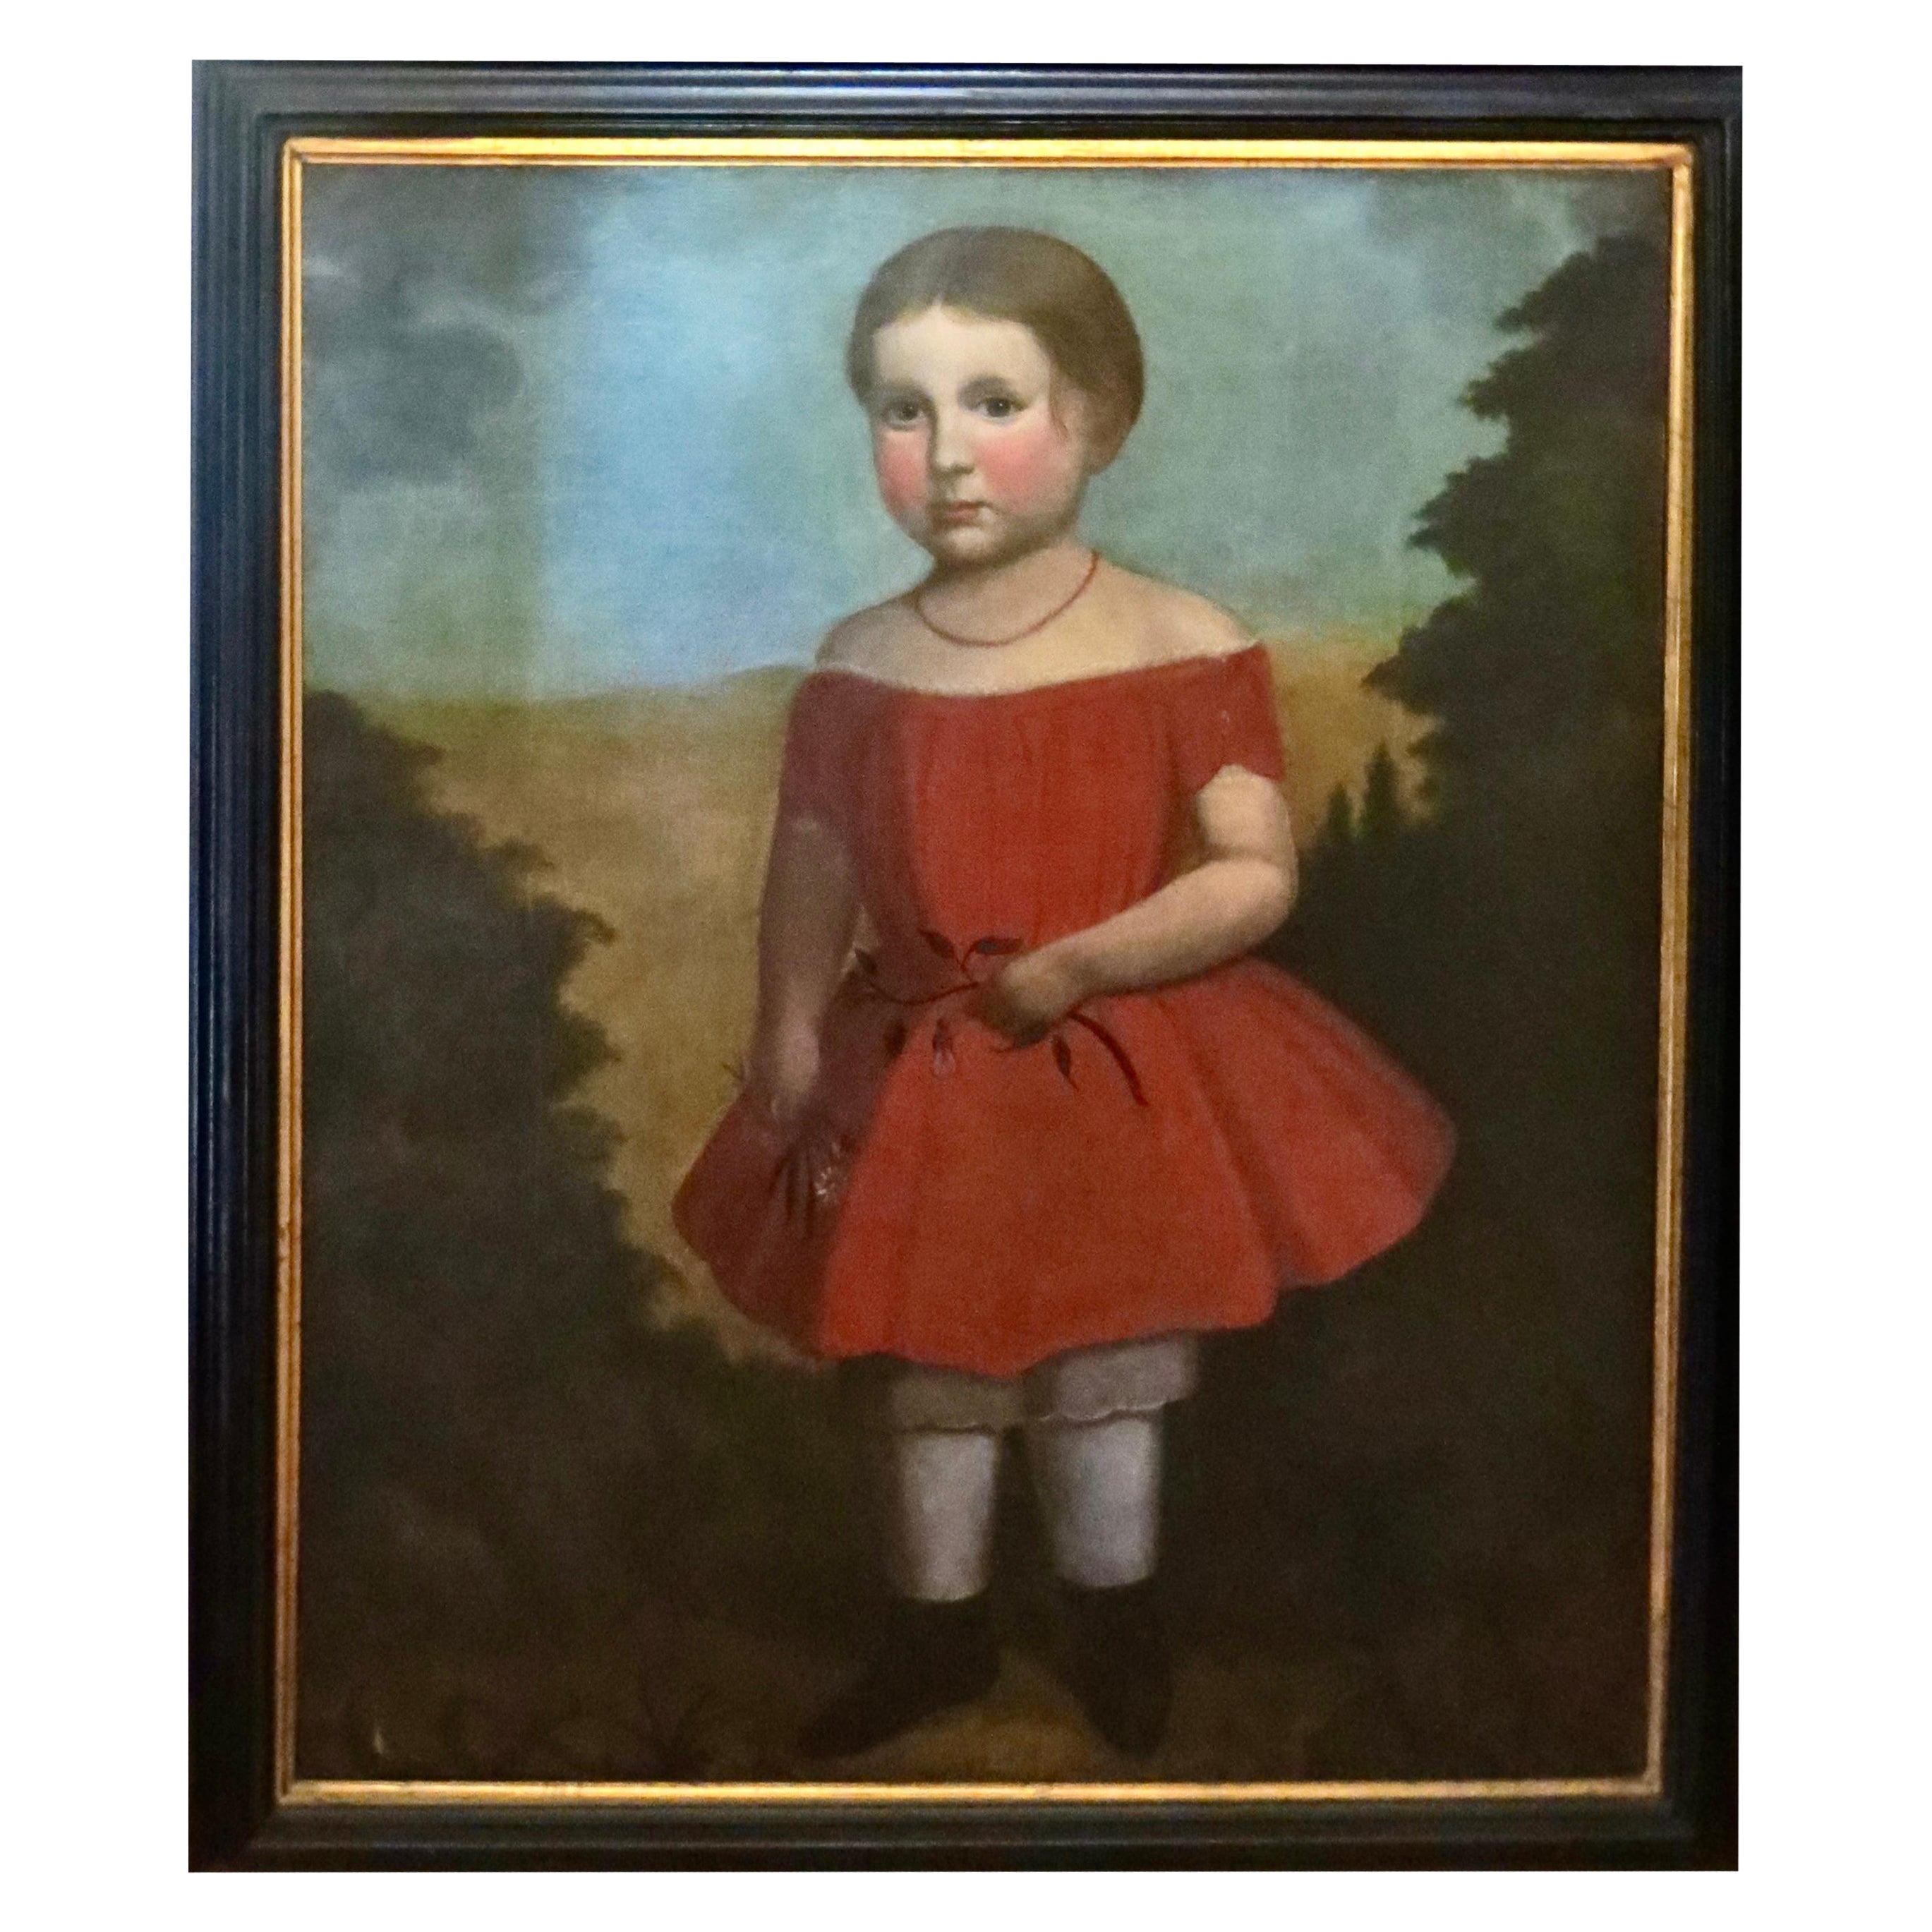 Folk Art Portrait Painting "Young Girl In a Red Dress", American, Circa 1825 For Sale